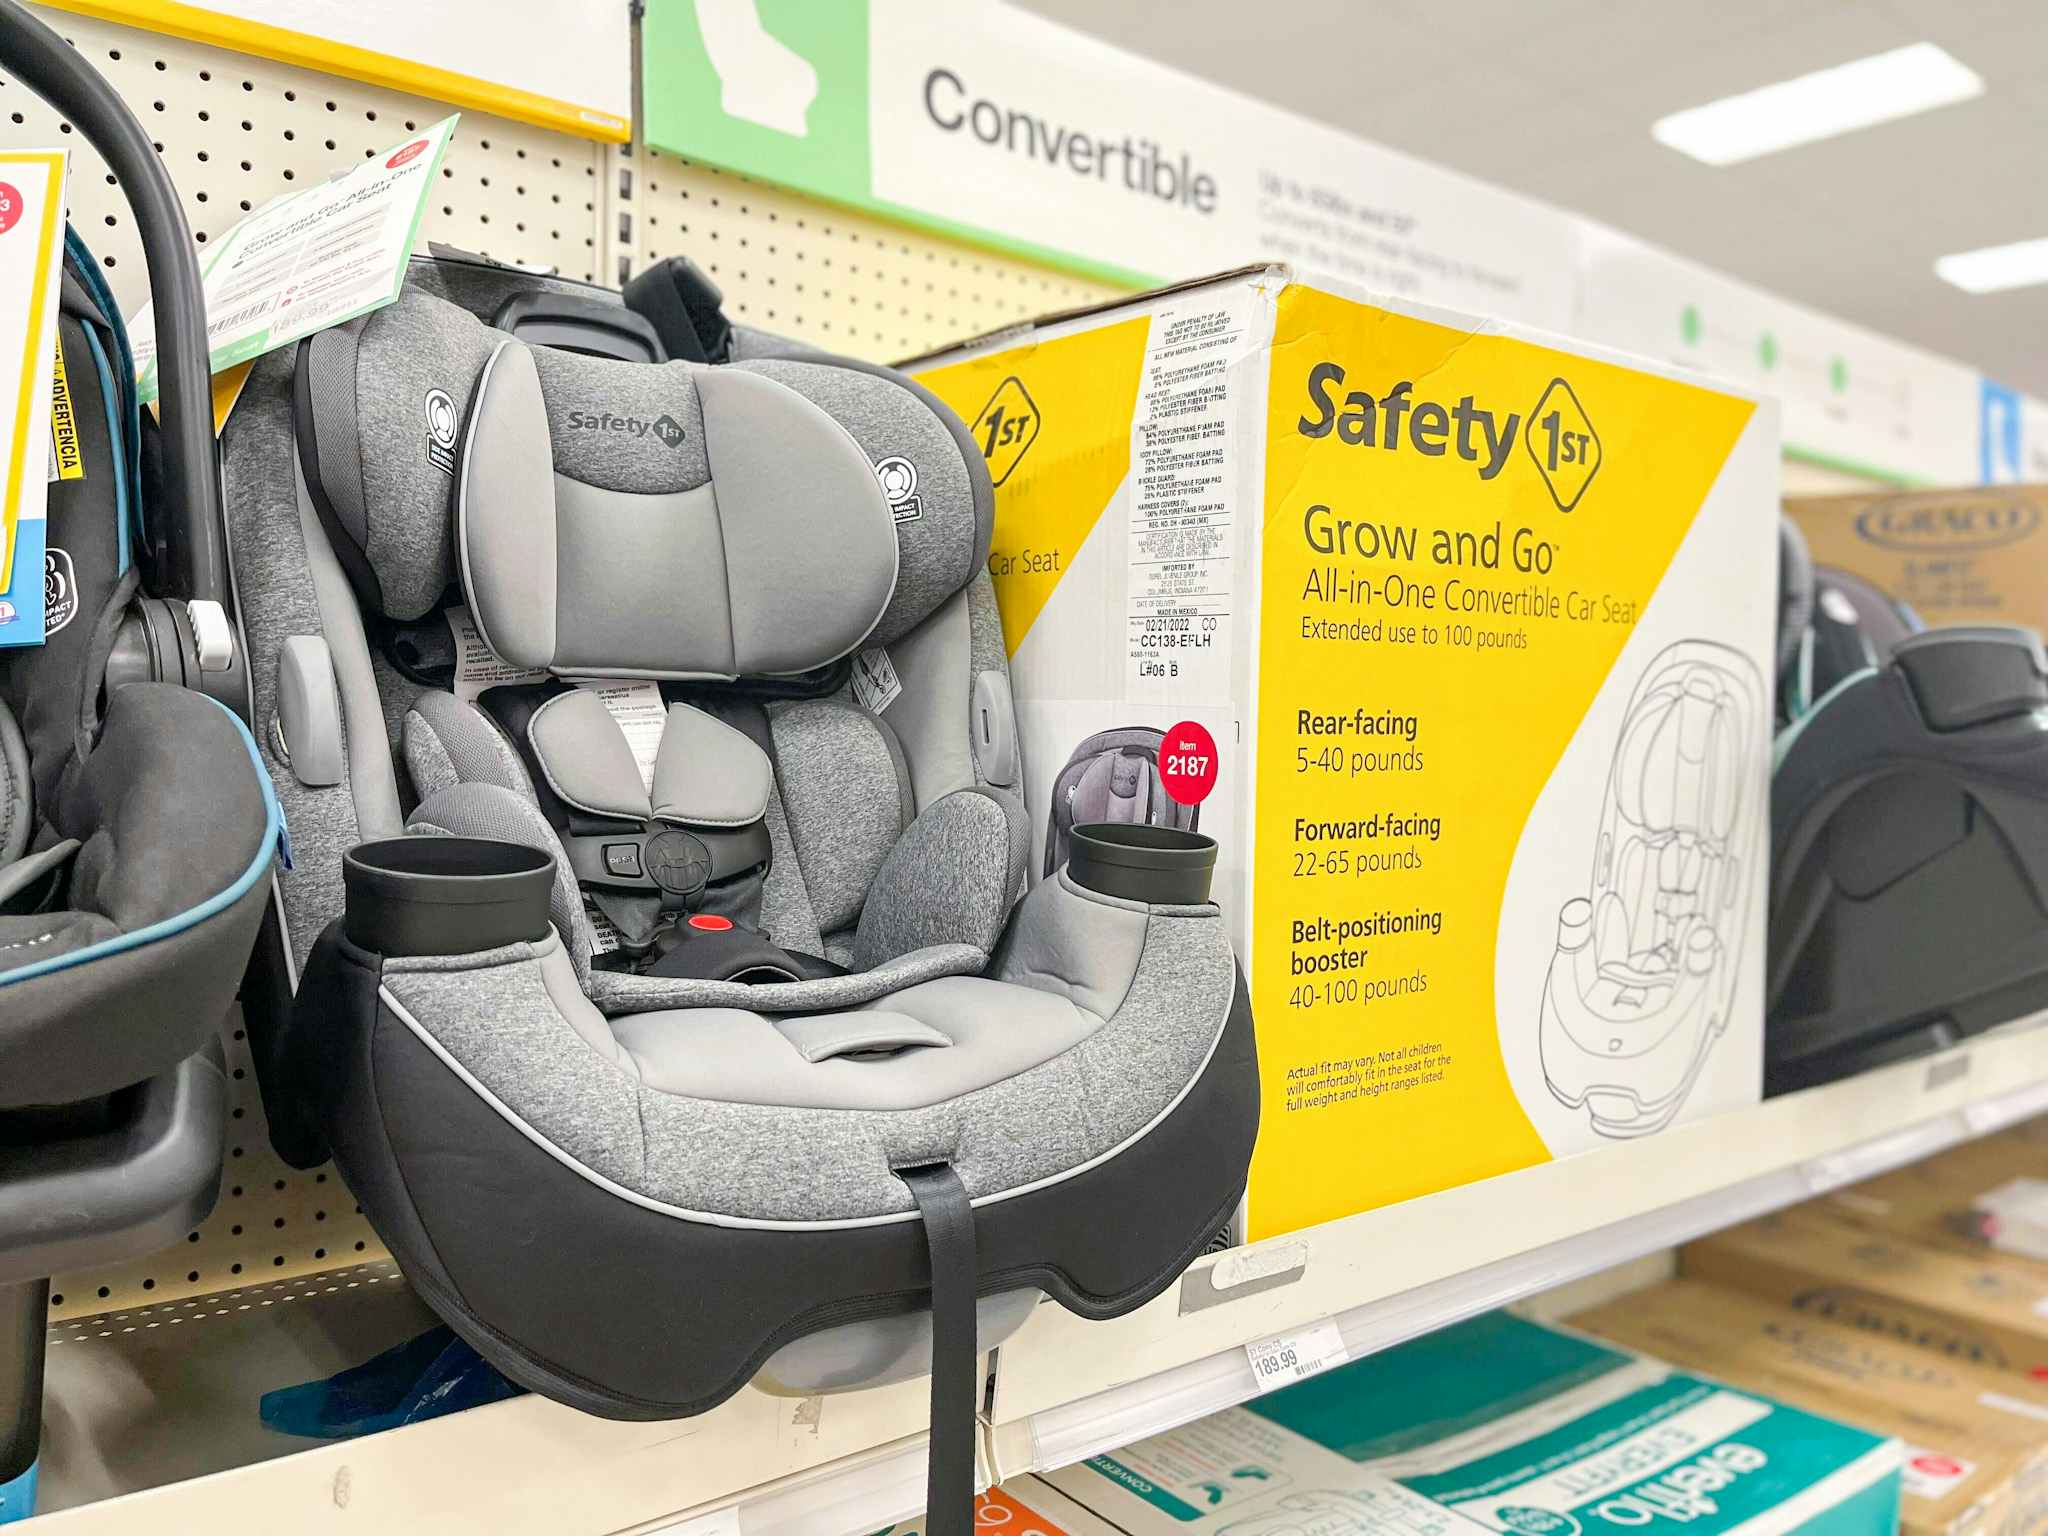 A Safety grow and go convertible car seat on the shelf at Target.